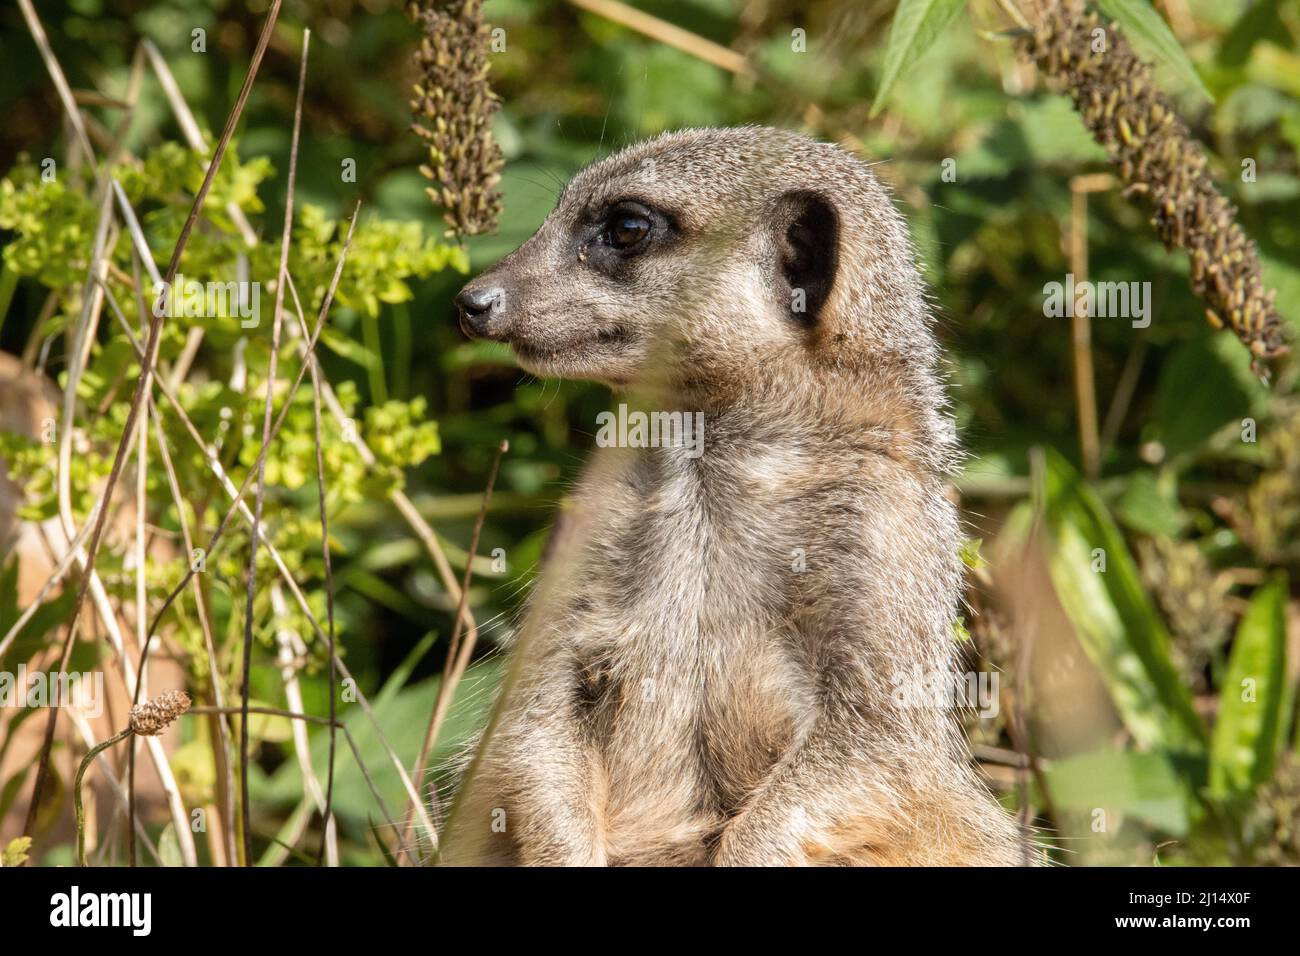 head and shoulders of an alert Slender tailed meerkat (Suricata suricatta)  isolated on a natural green background with rocks Stock Photo